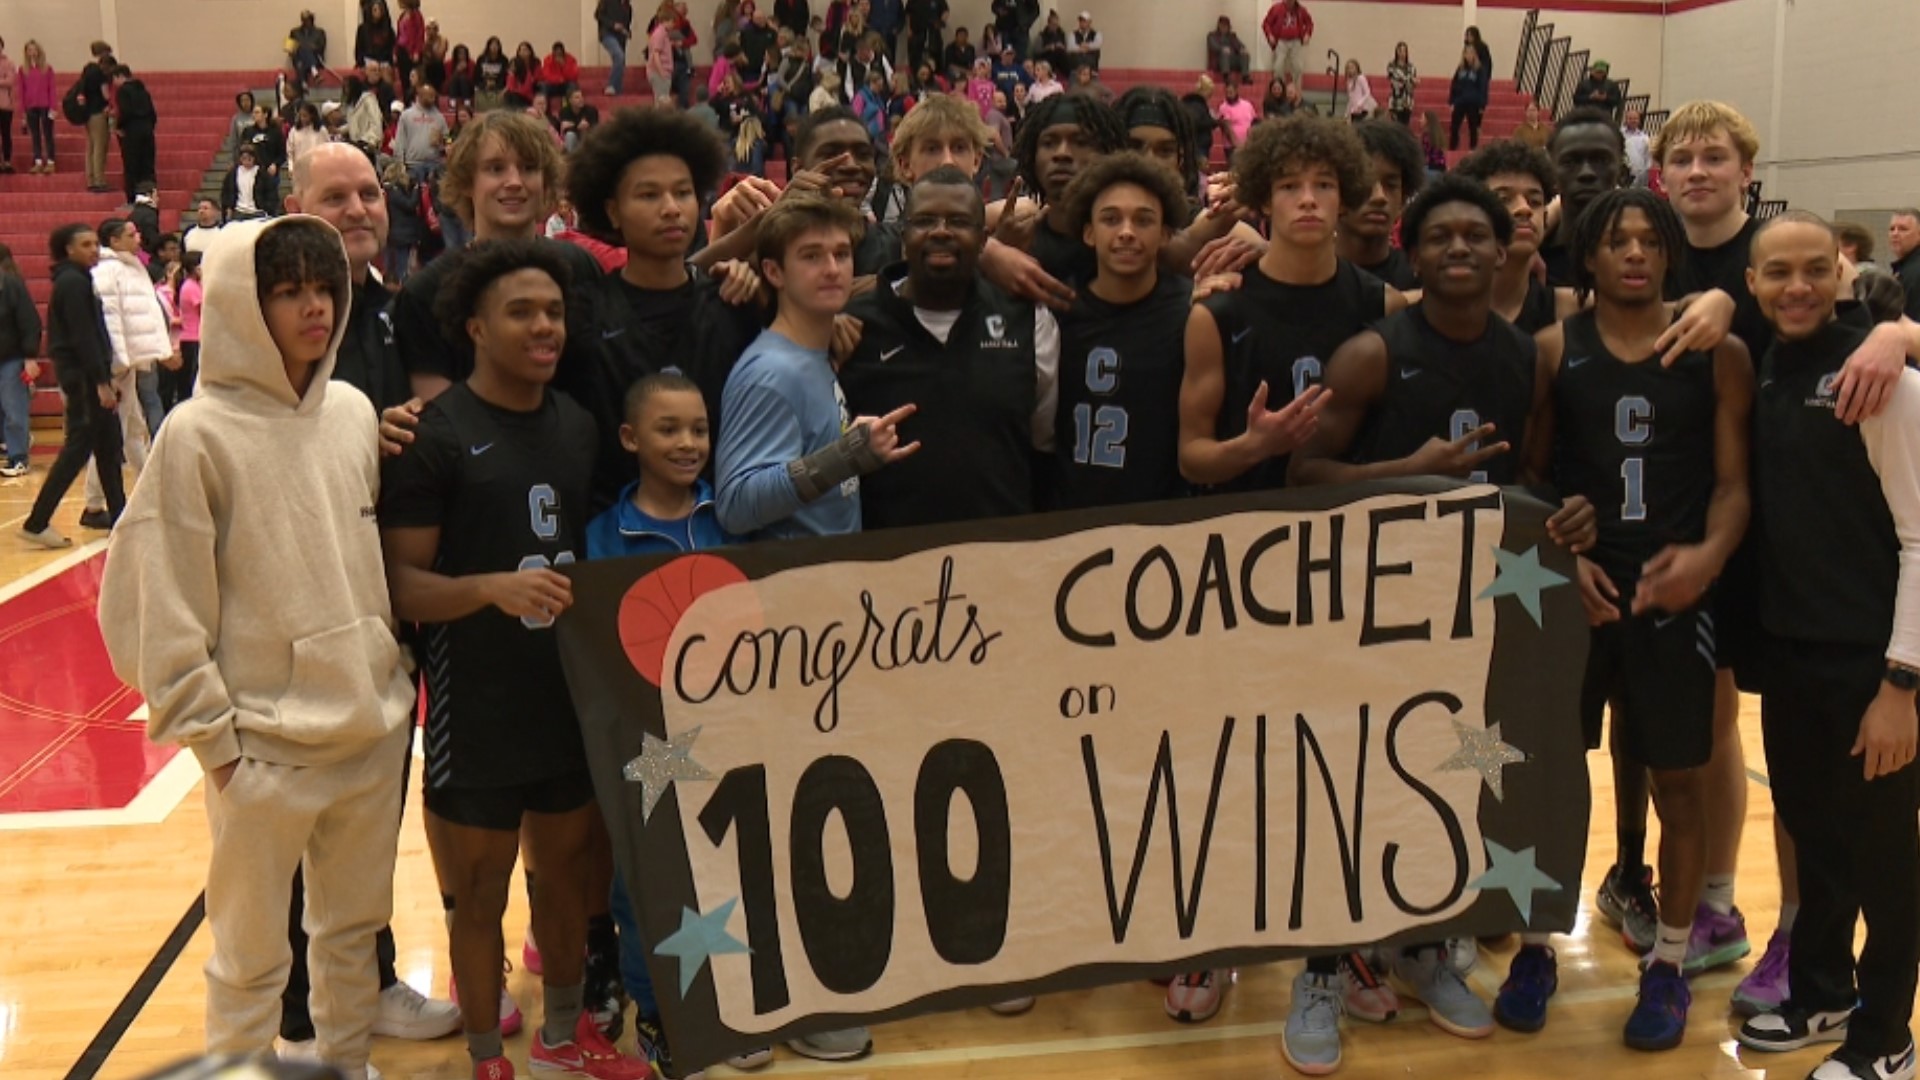 With the 46-42 dub over Northview, Taylor earned his 100th career victory coaching the Eagles.